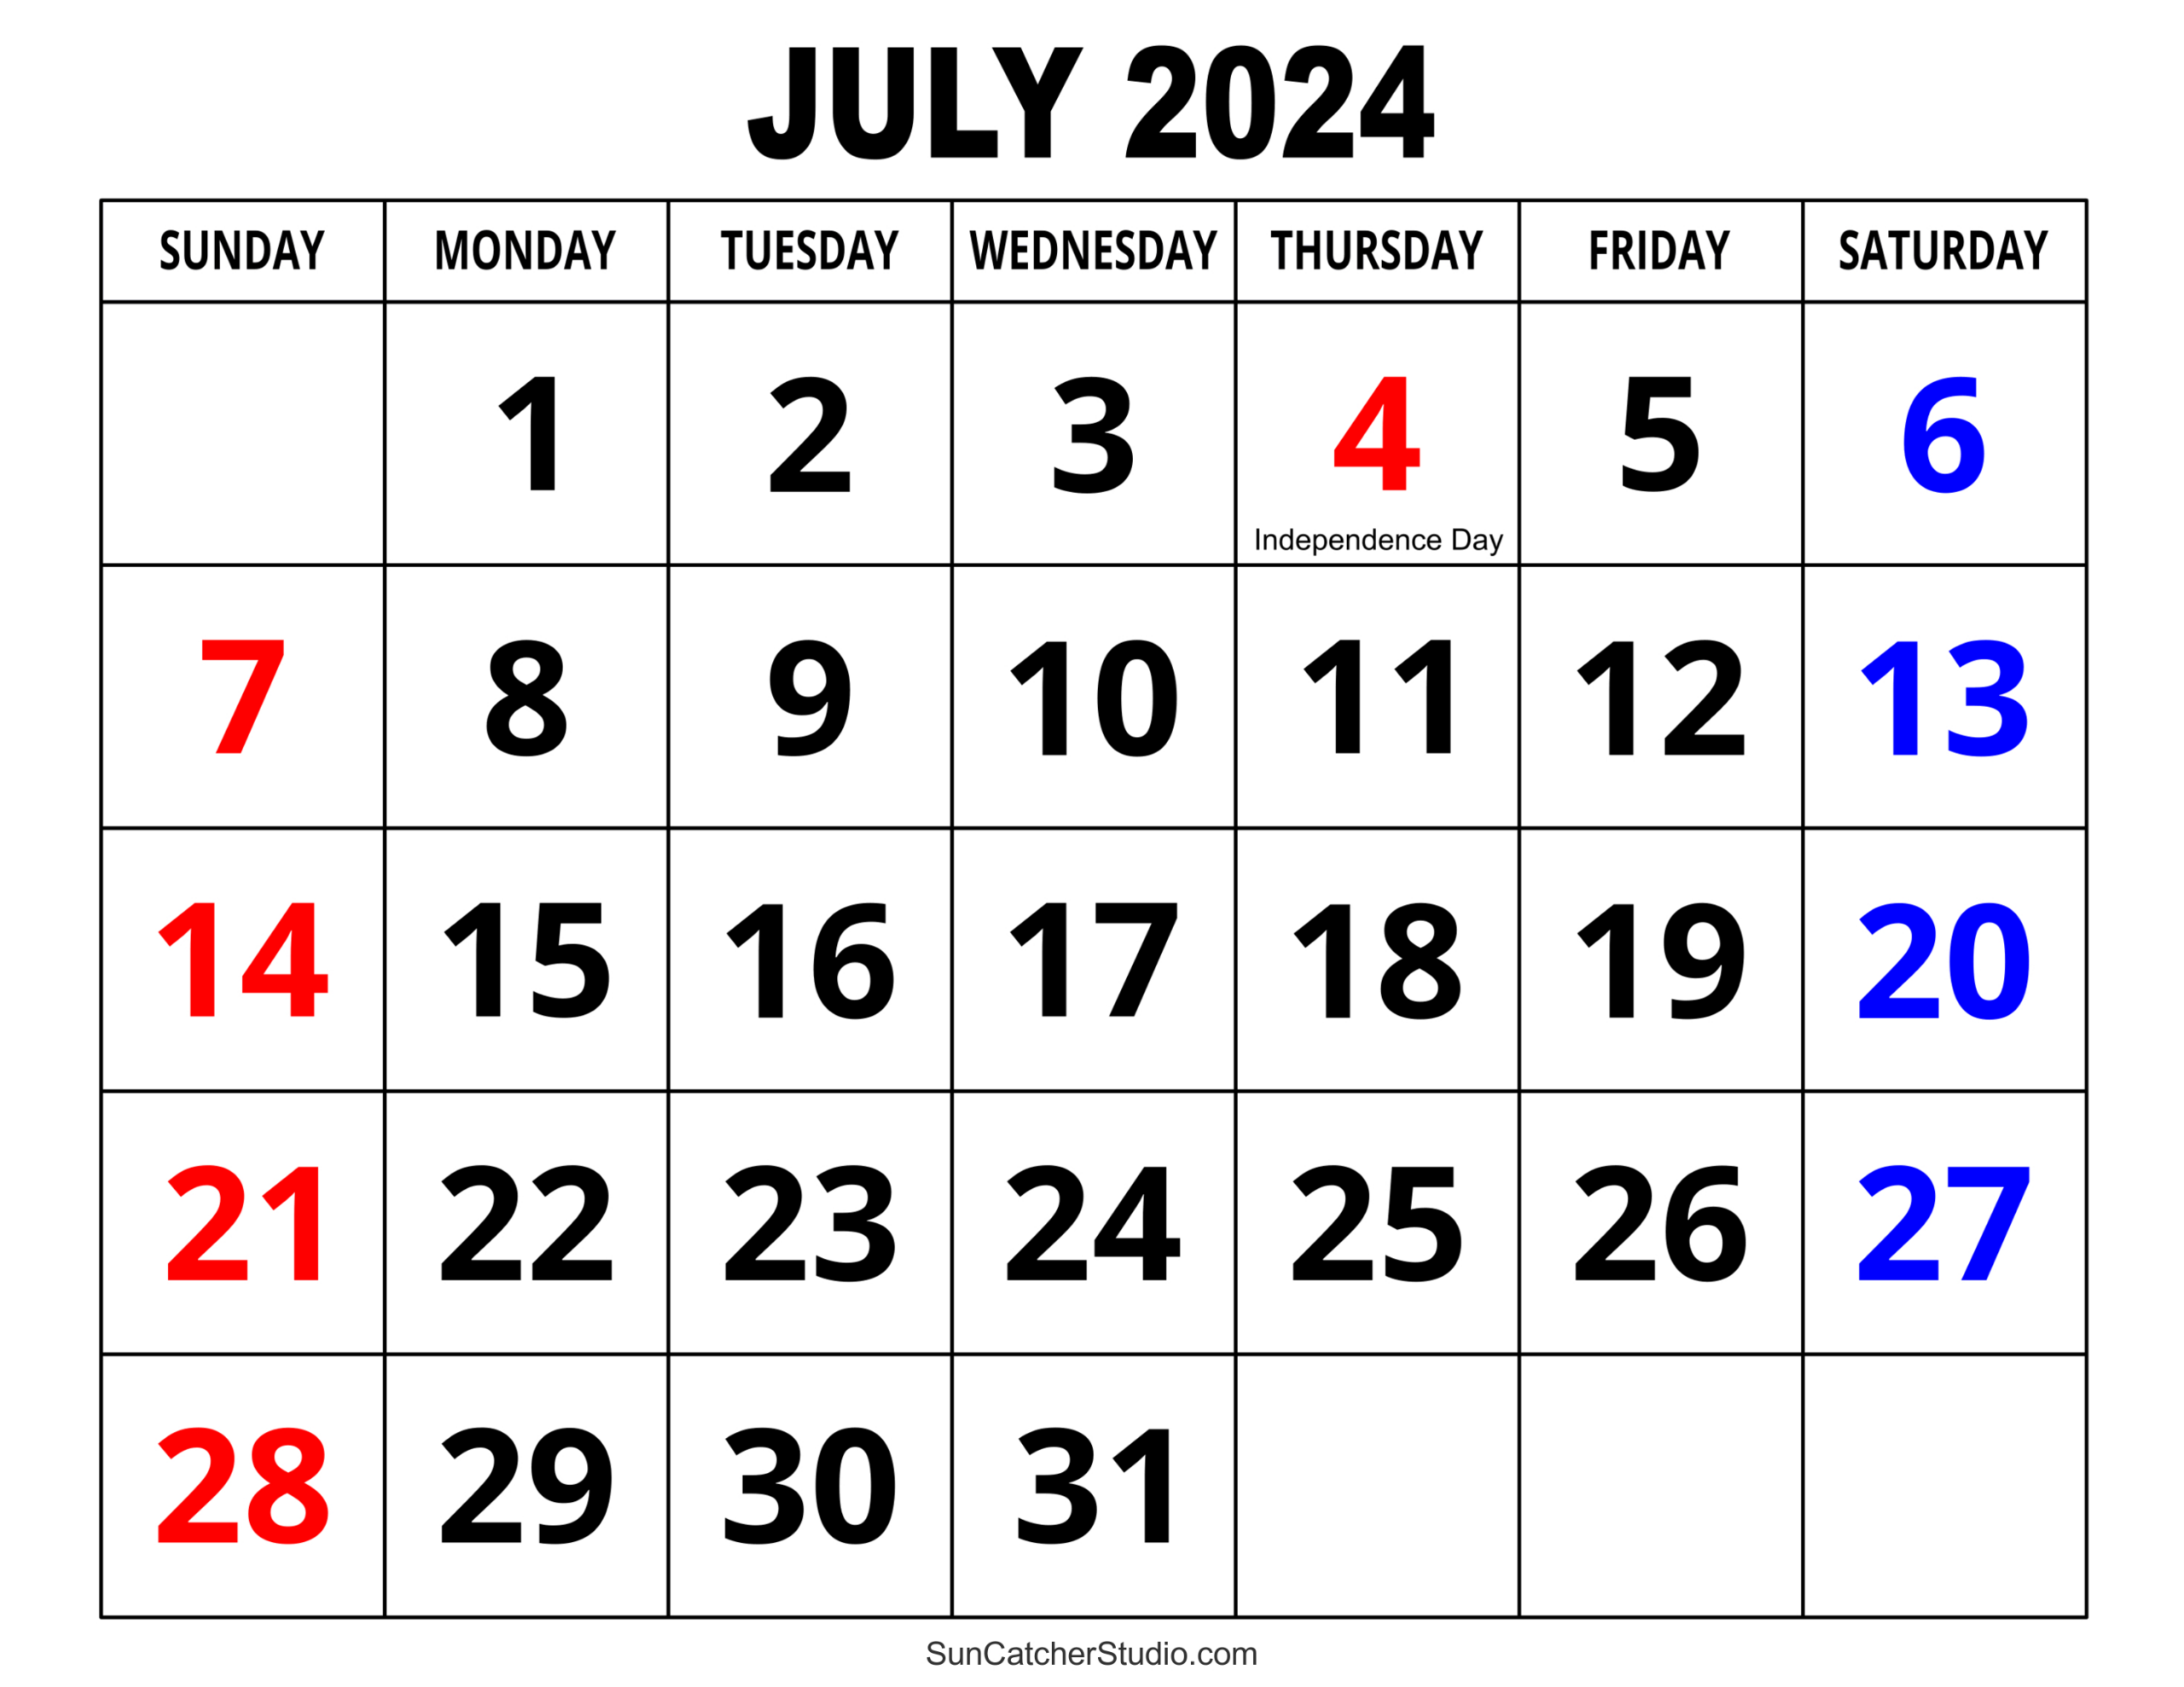 July 2024 Calendar (Free Printable) – Diy Projects, Patterns | 19 July 2024 Calendar Printable